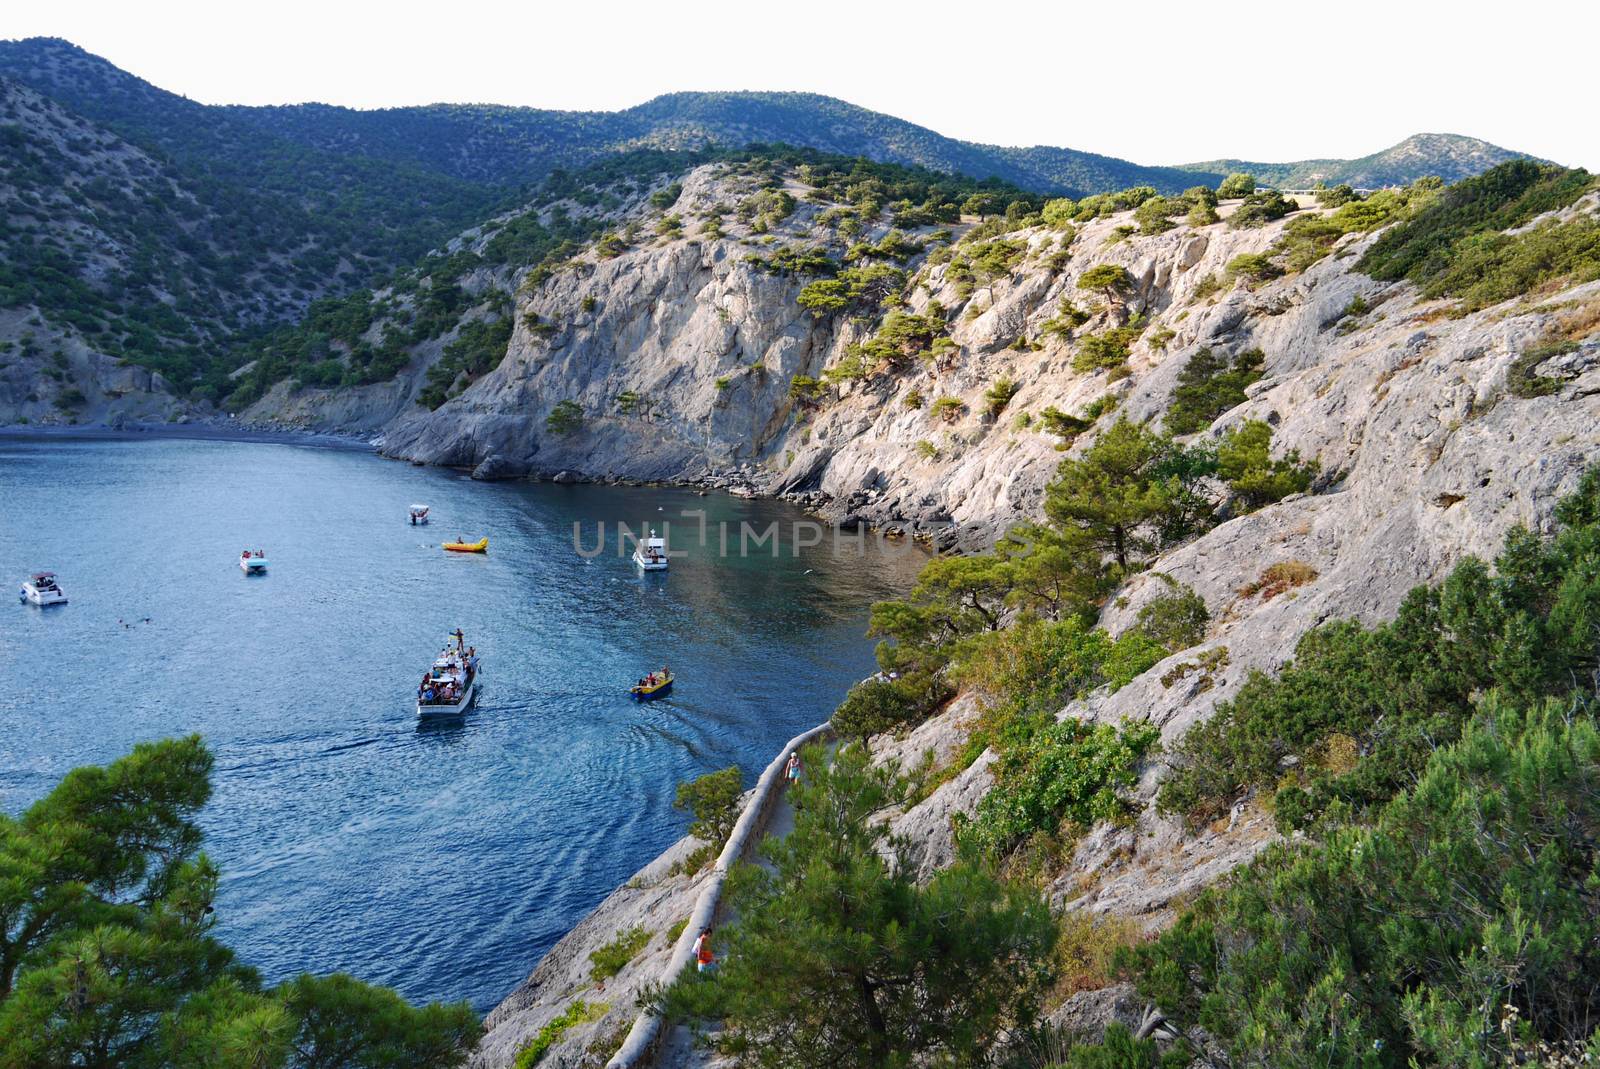 deep bay in the deep sea is surrounded by endless grass-covered rocks. Walking in the nature